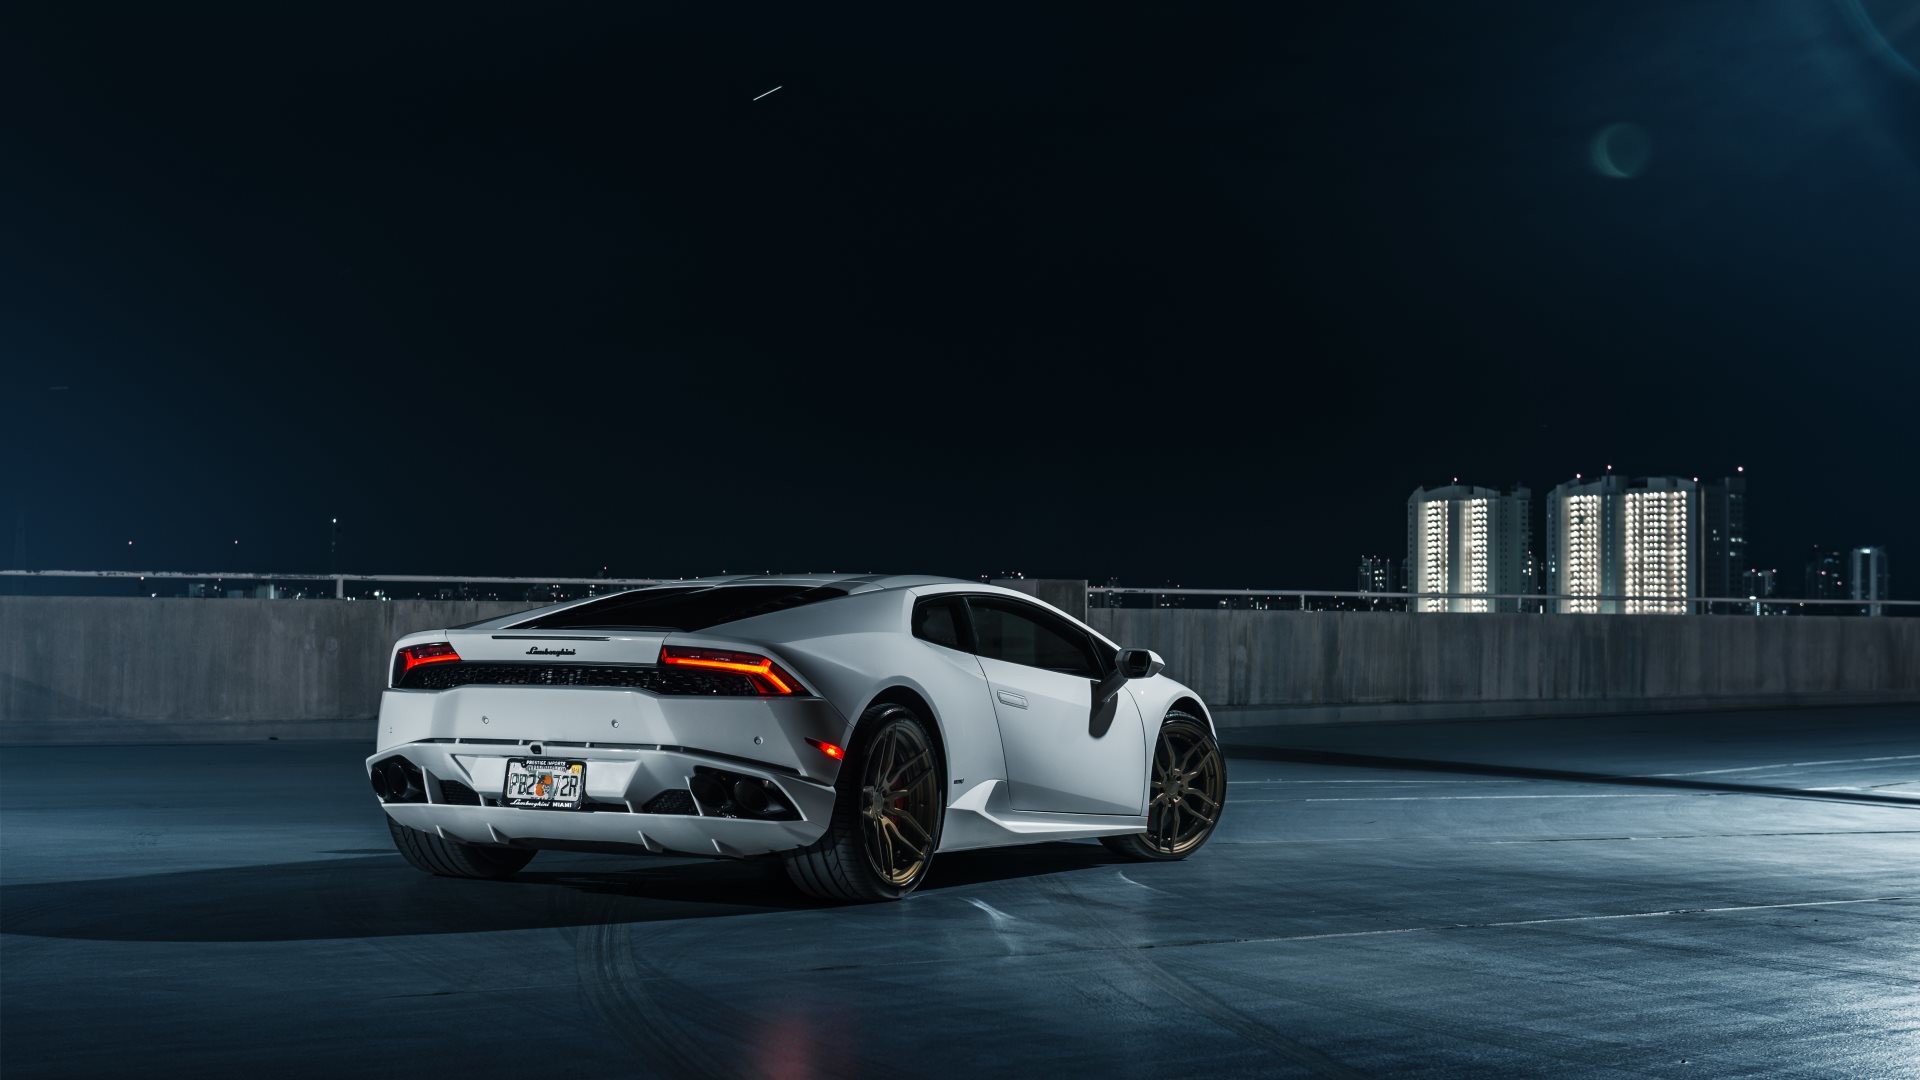 1920x1080 The 2nd HD wallpaper with Lamborghini Huracan customized with ADV.1 wheels  ready to be set in any modern screen